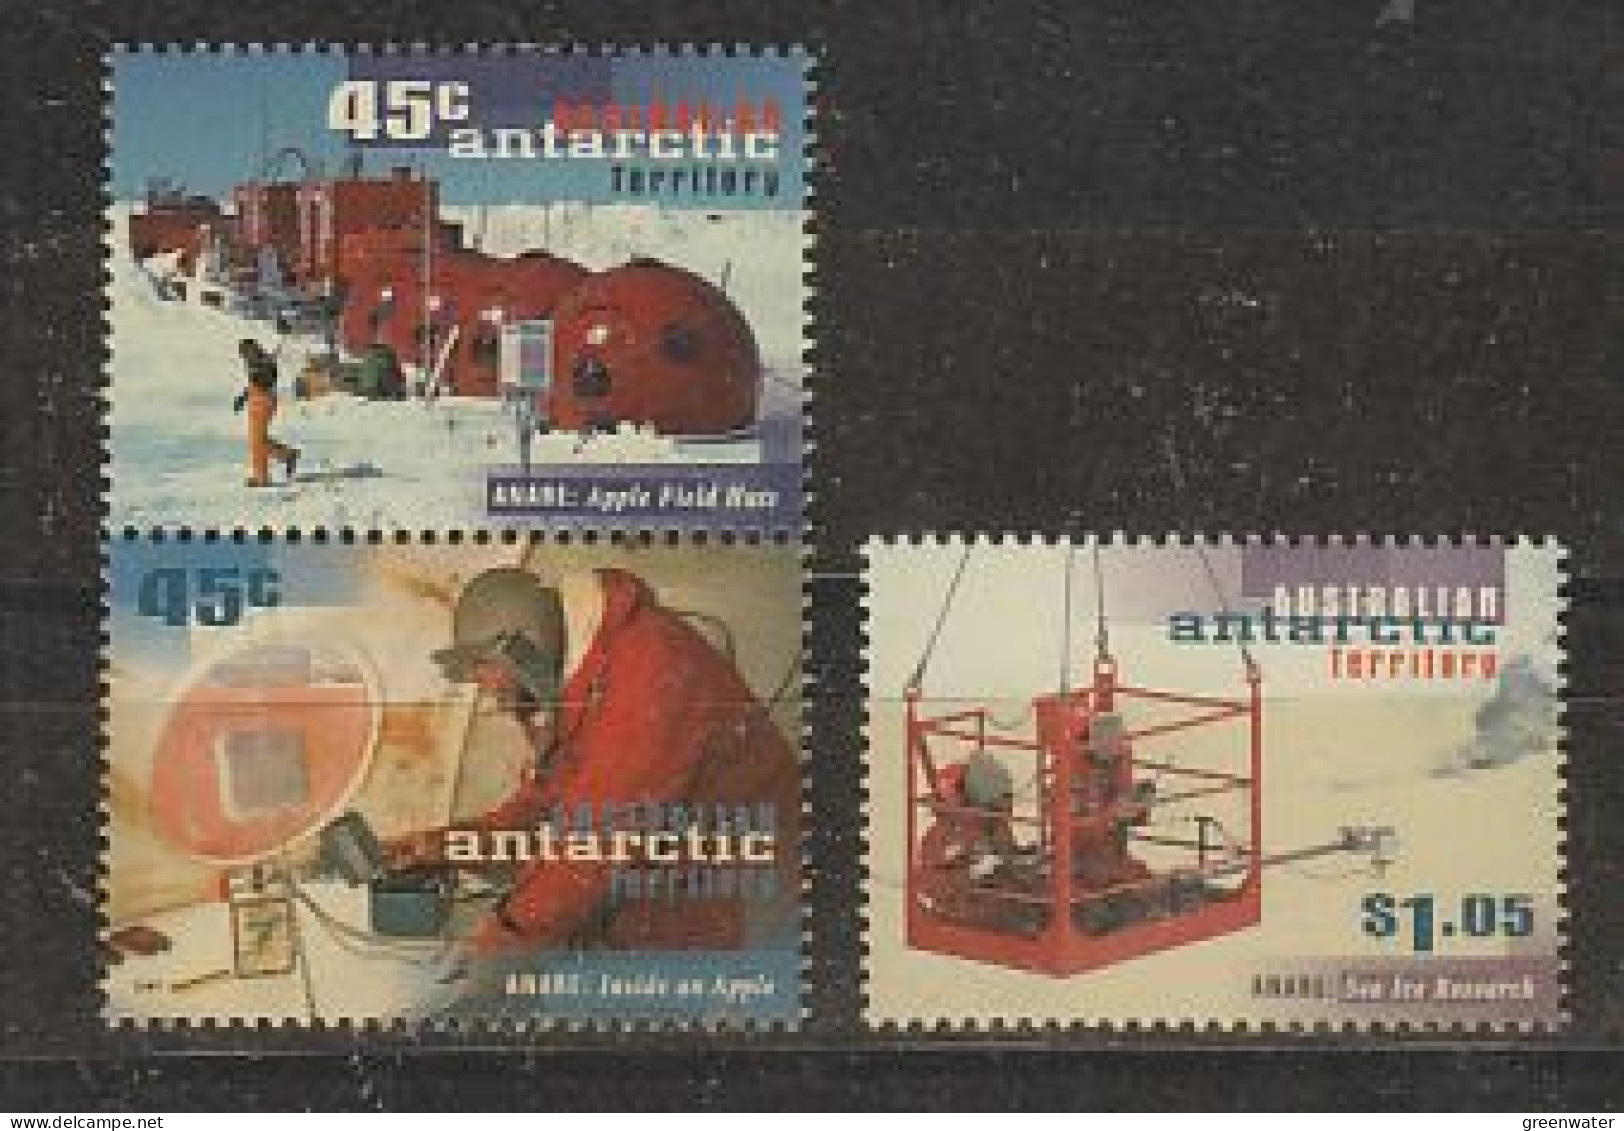 AAT 1997 Antarctic Research Expeditions 3v **  Mnh (59878) - Unused Stamps